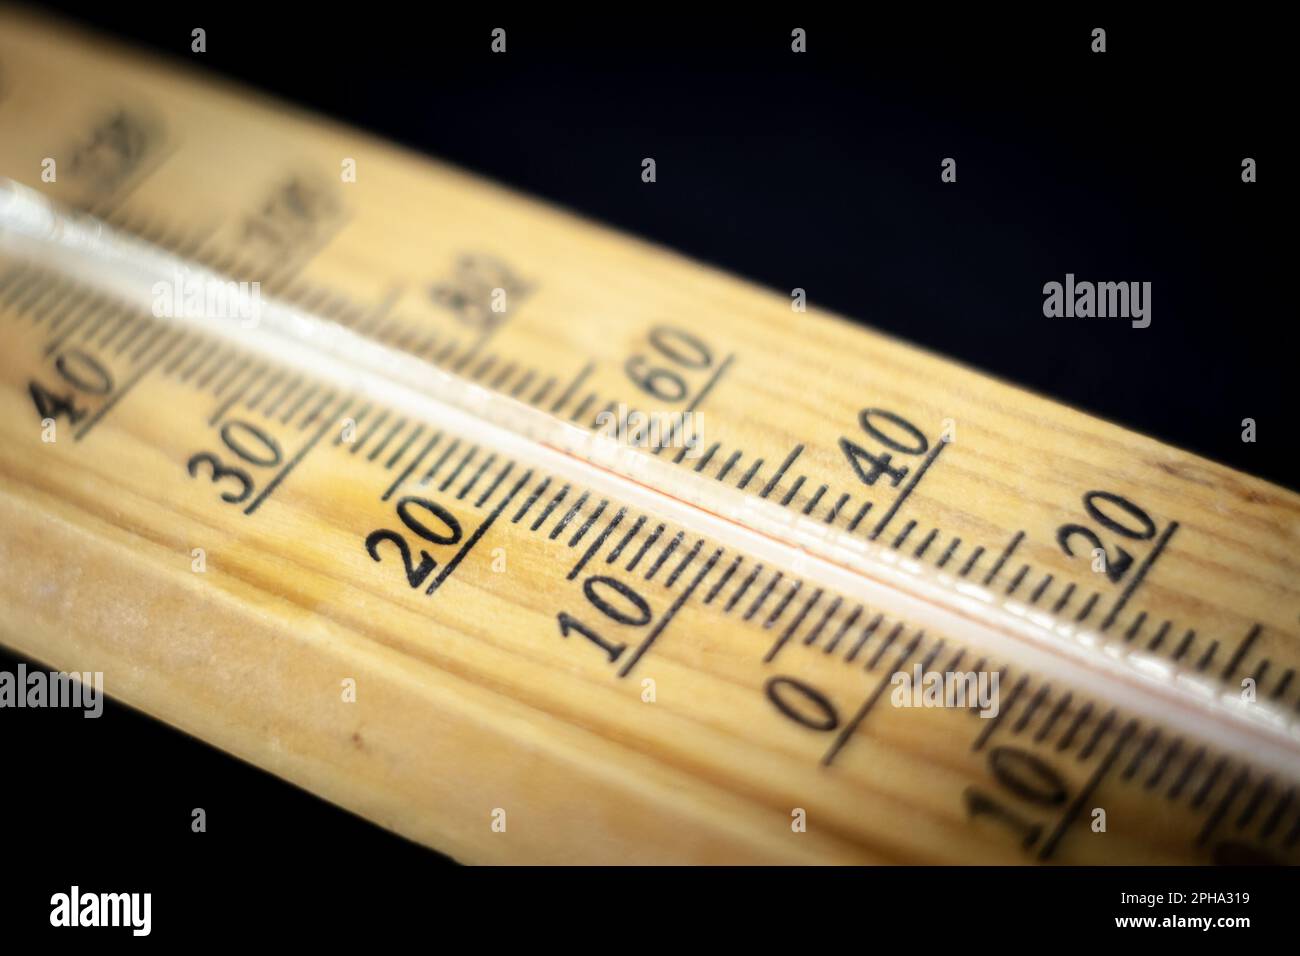 Picture of a thermometer used to measure room temperature, a wooden thermometer, indicating 20 degrees celsius, the recommended temperature for indoor Stock Photo